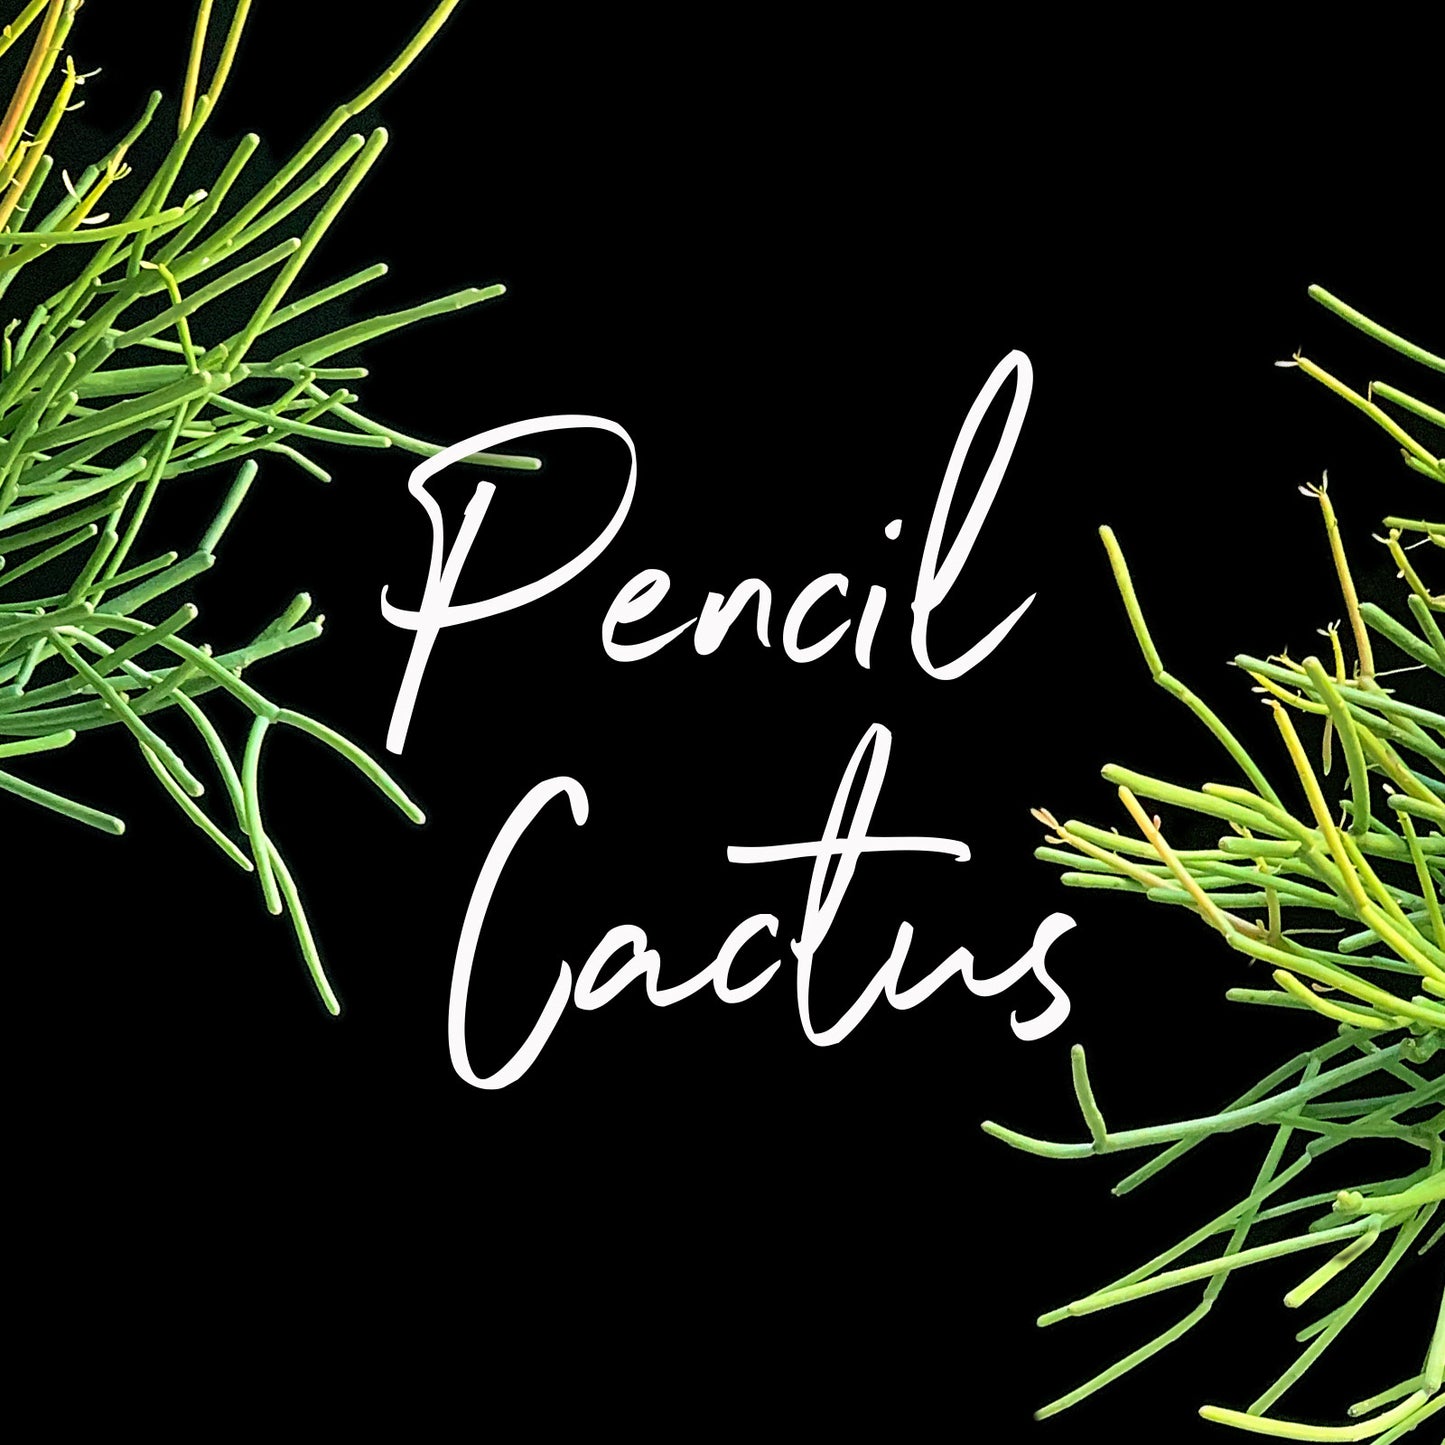 A close-up image of green pencil cactus branches on a black background with the white text ‘Pencil Cactus’ in the center.